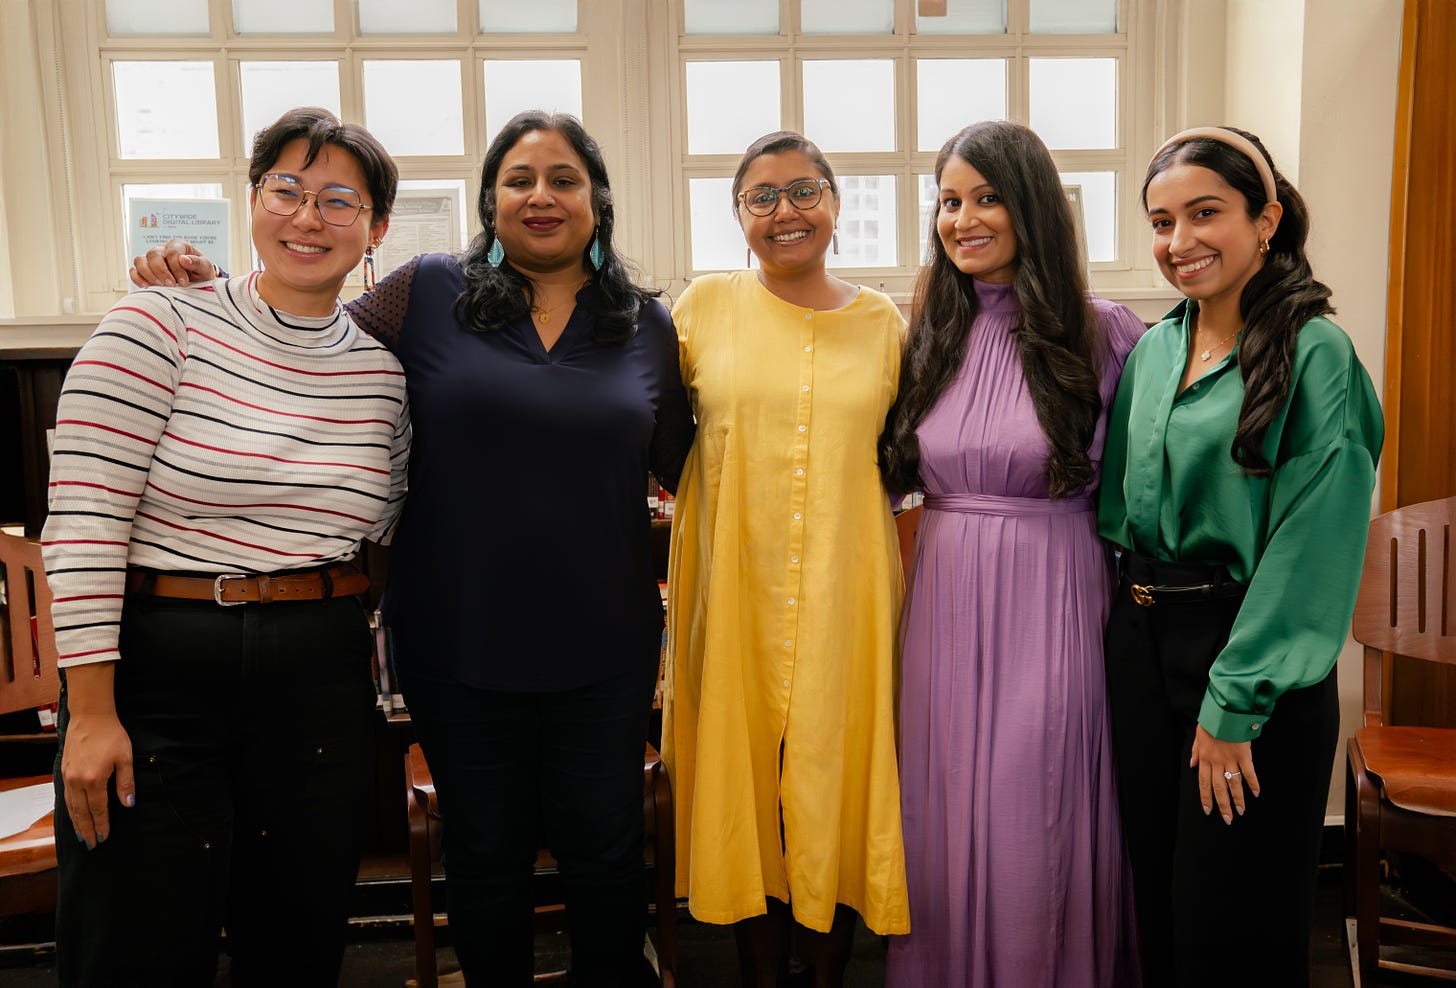 Lucy Yu (owner of Yu & Me Books), Kirthana Ramisetti (author of Dava Shastri's Last Day, Advika and the Hollywood Wives), Megha Majumdar (author of A Burning), Saumya Dave (author of Well-Behaved Indian Women, What a Happy Family), Mishika Narula (co-founder of Brown Girl Bookshelf)